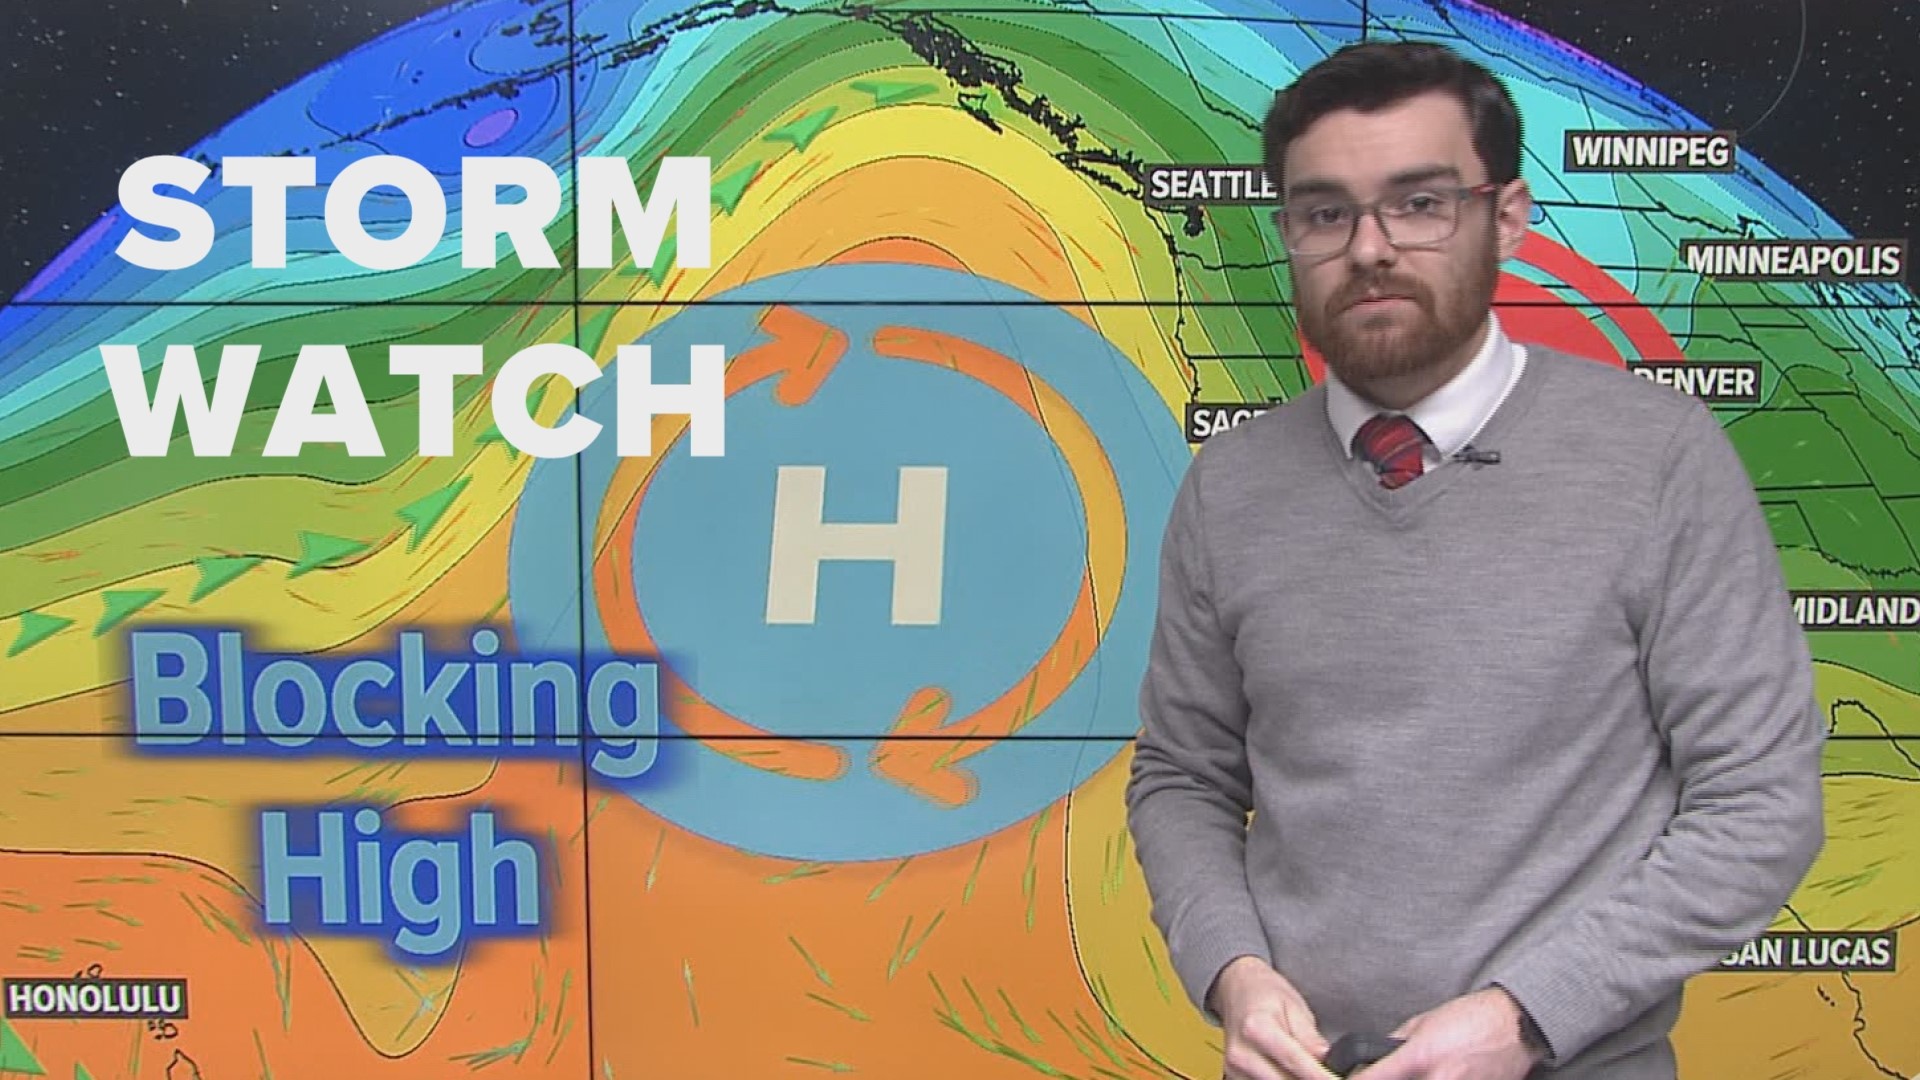 ABC10 meteorologist Brenden Mincheff breaks down the storms for the first day of the holiday weekend, plus a quick drought update.